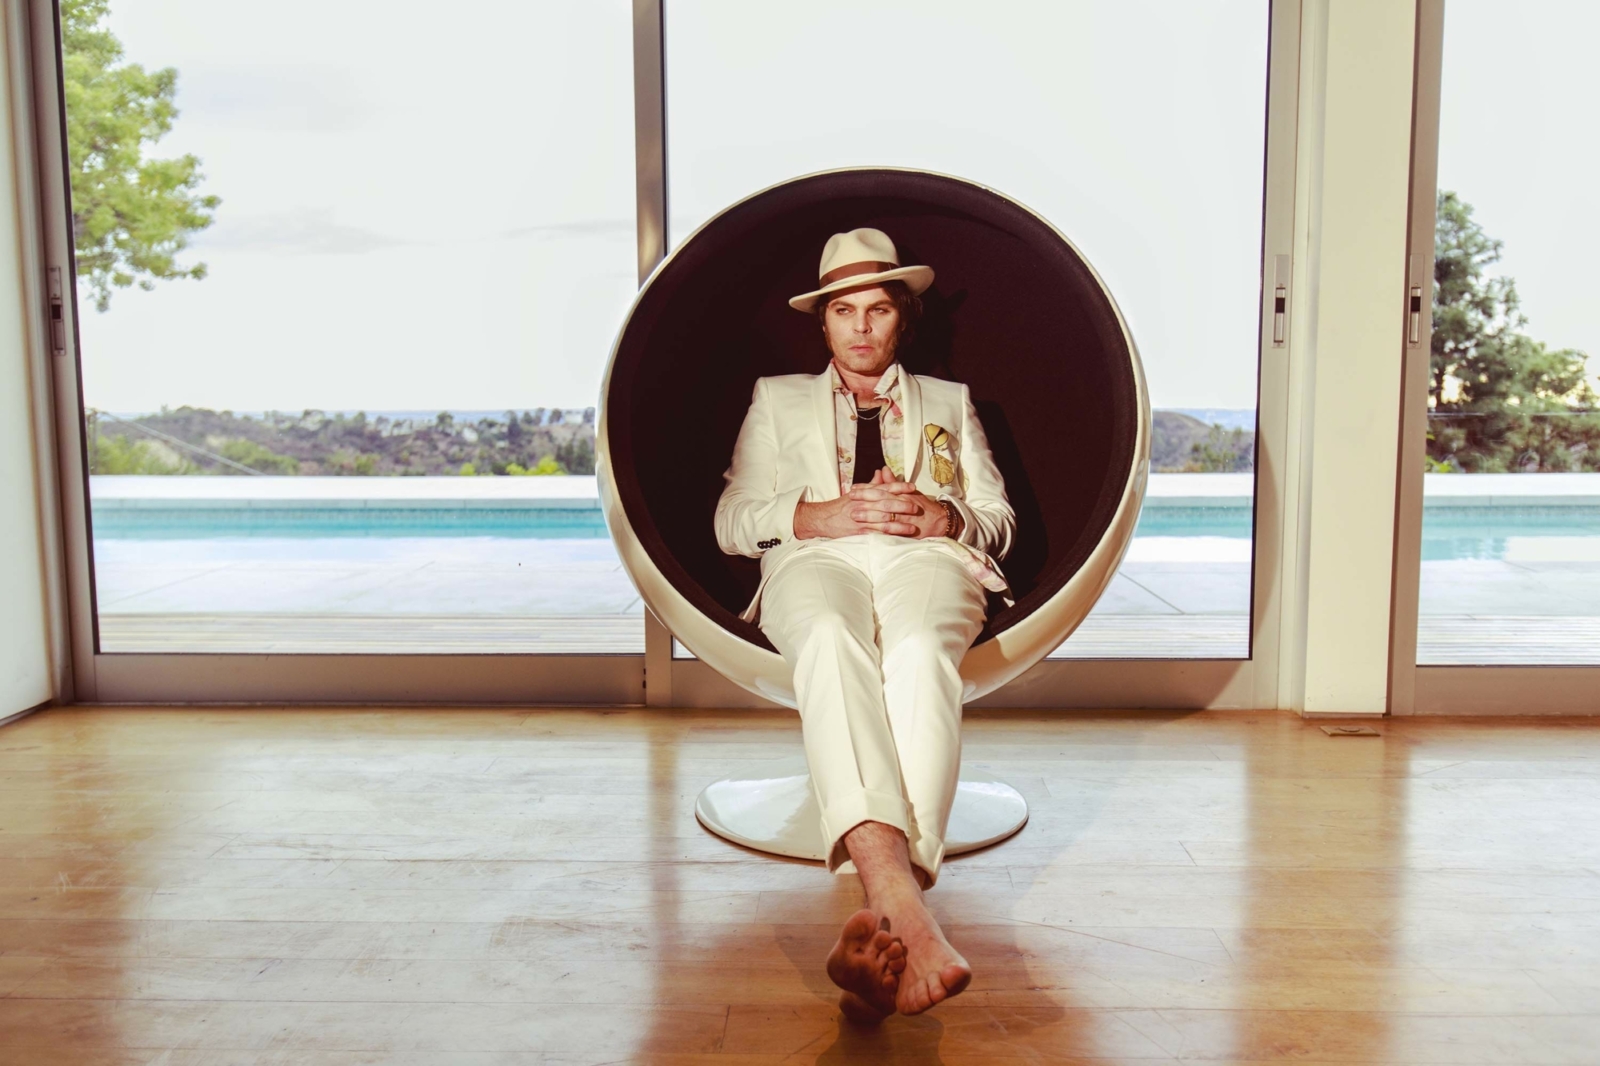 Gaz Coombes unveils his first material of 2019 with new single 'Salamander'